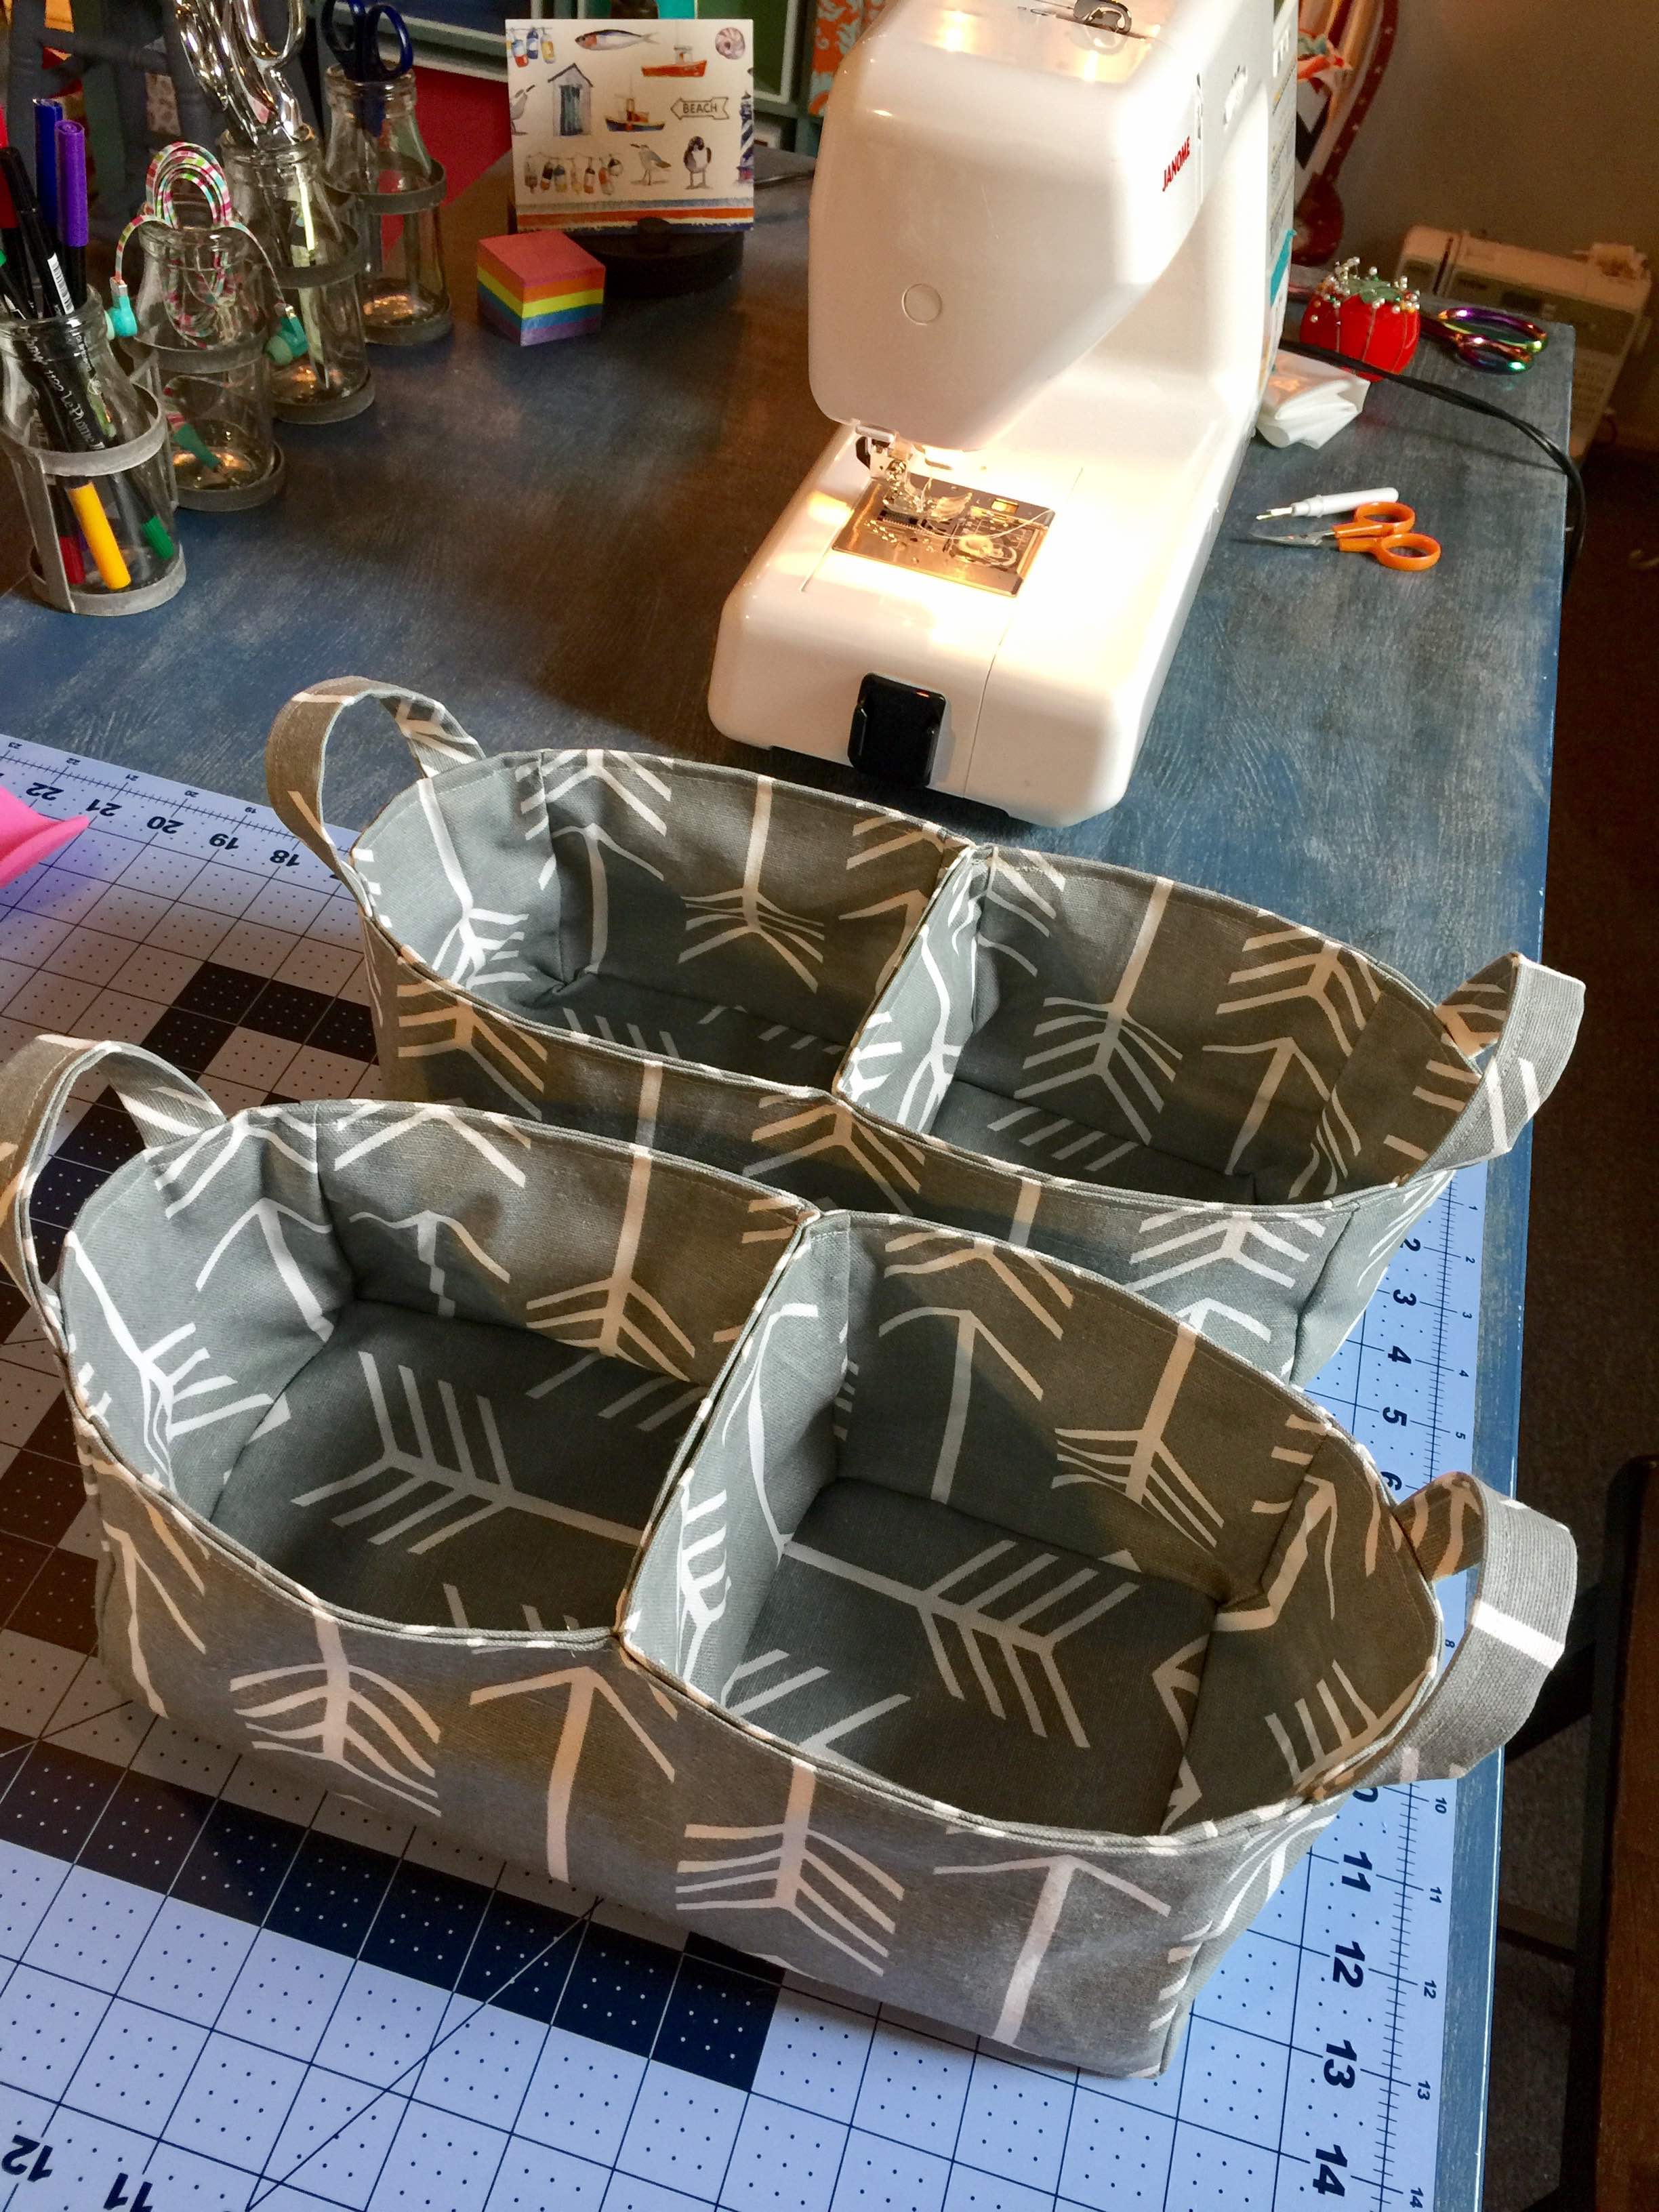 How to Sew a Divided Organizer Caddy by Sewspire